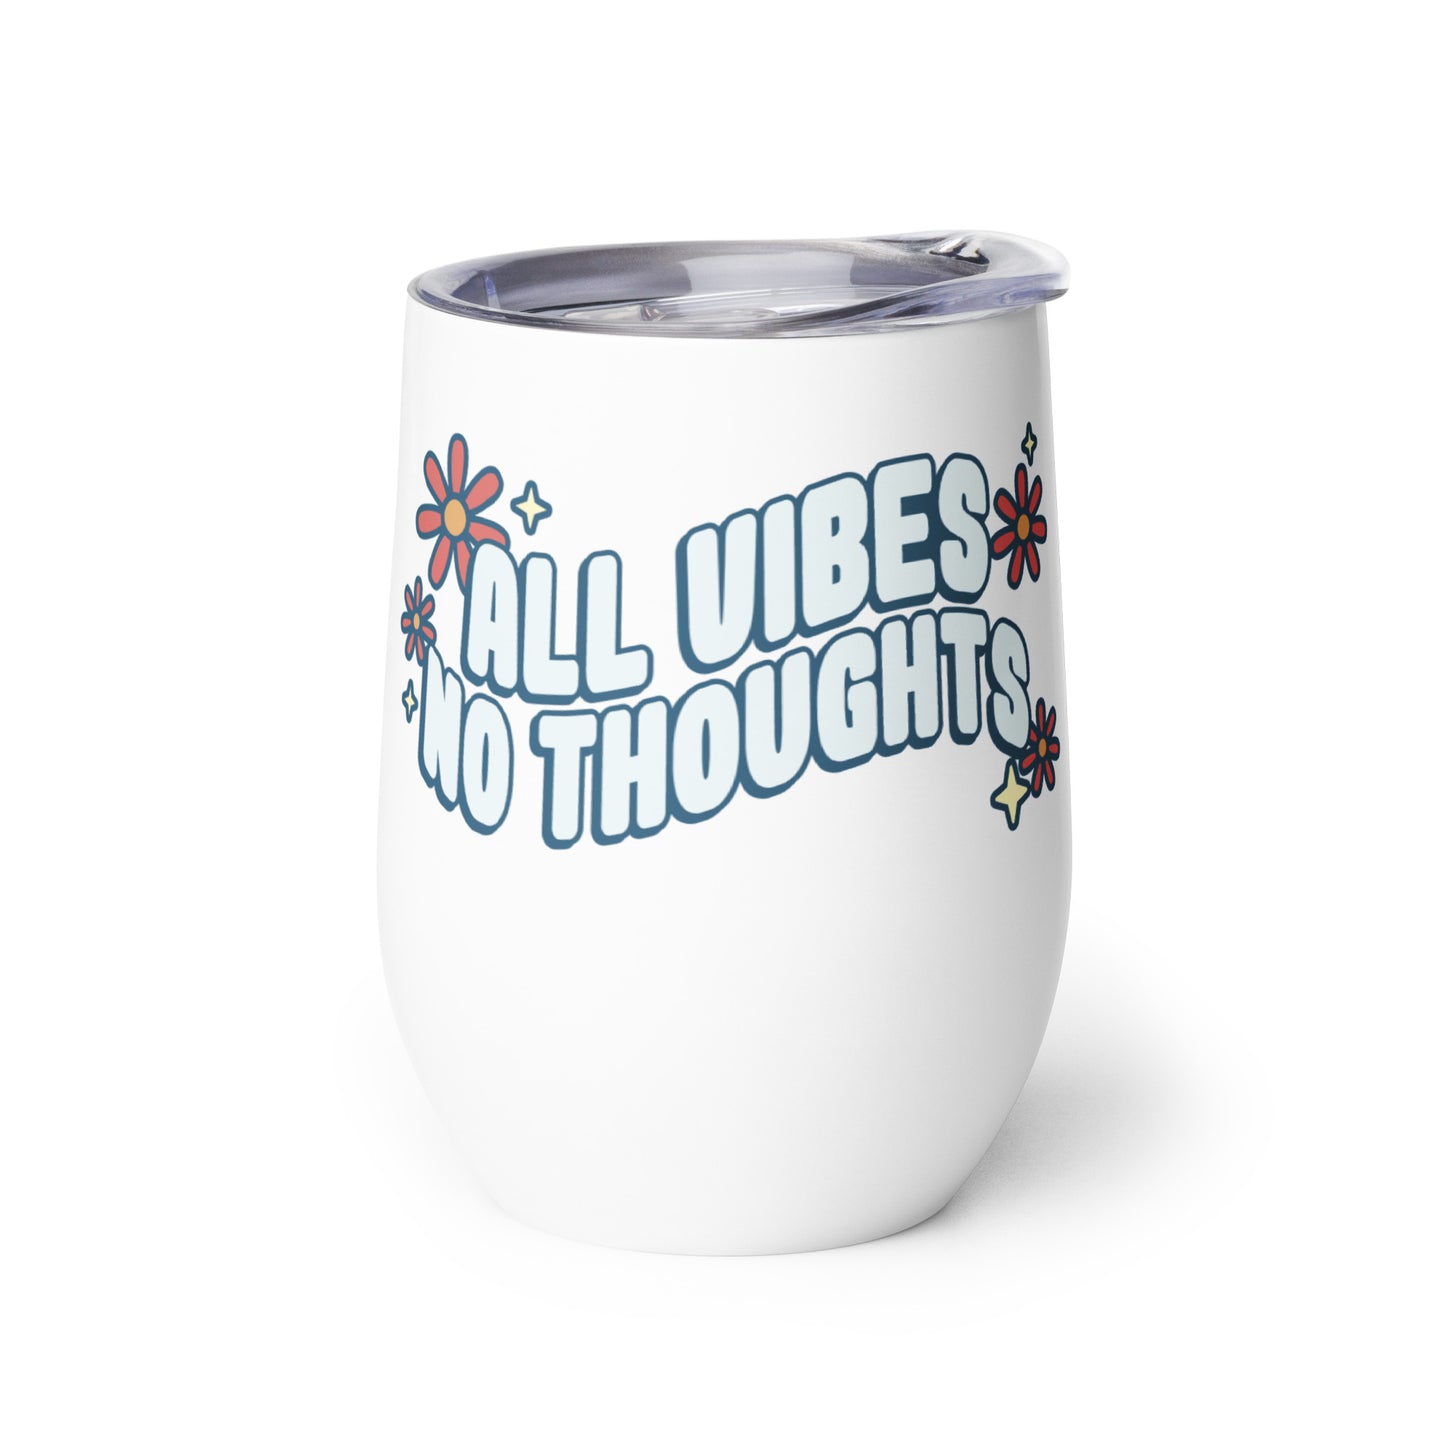 A white wine tumbler featuring text that reads "All vibes no thoughts". Around the text are pink flowers and pale yellow sparkles.